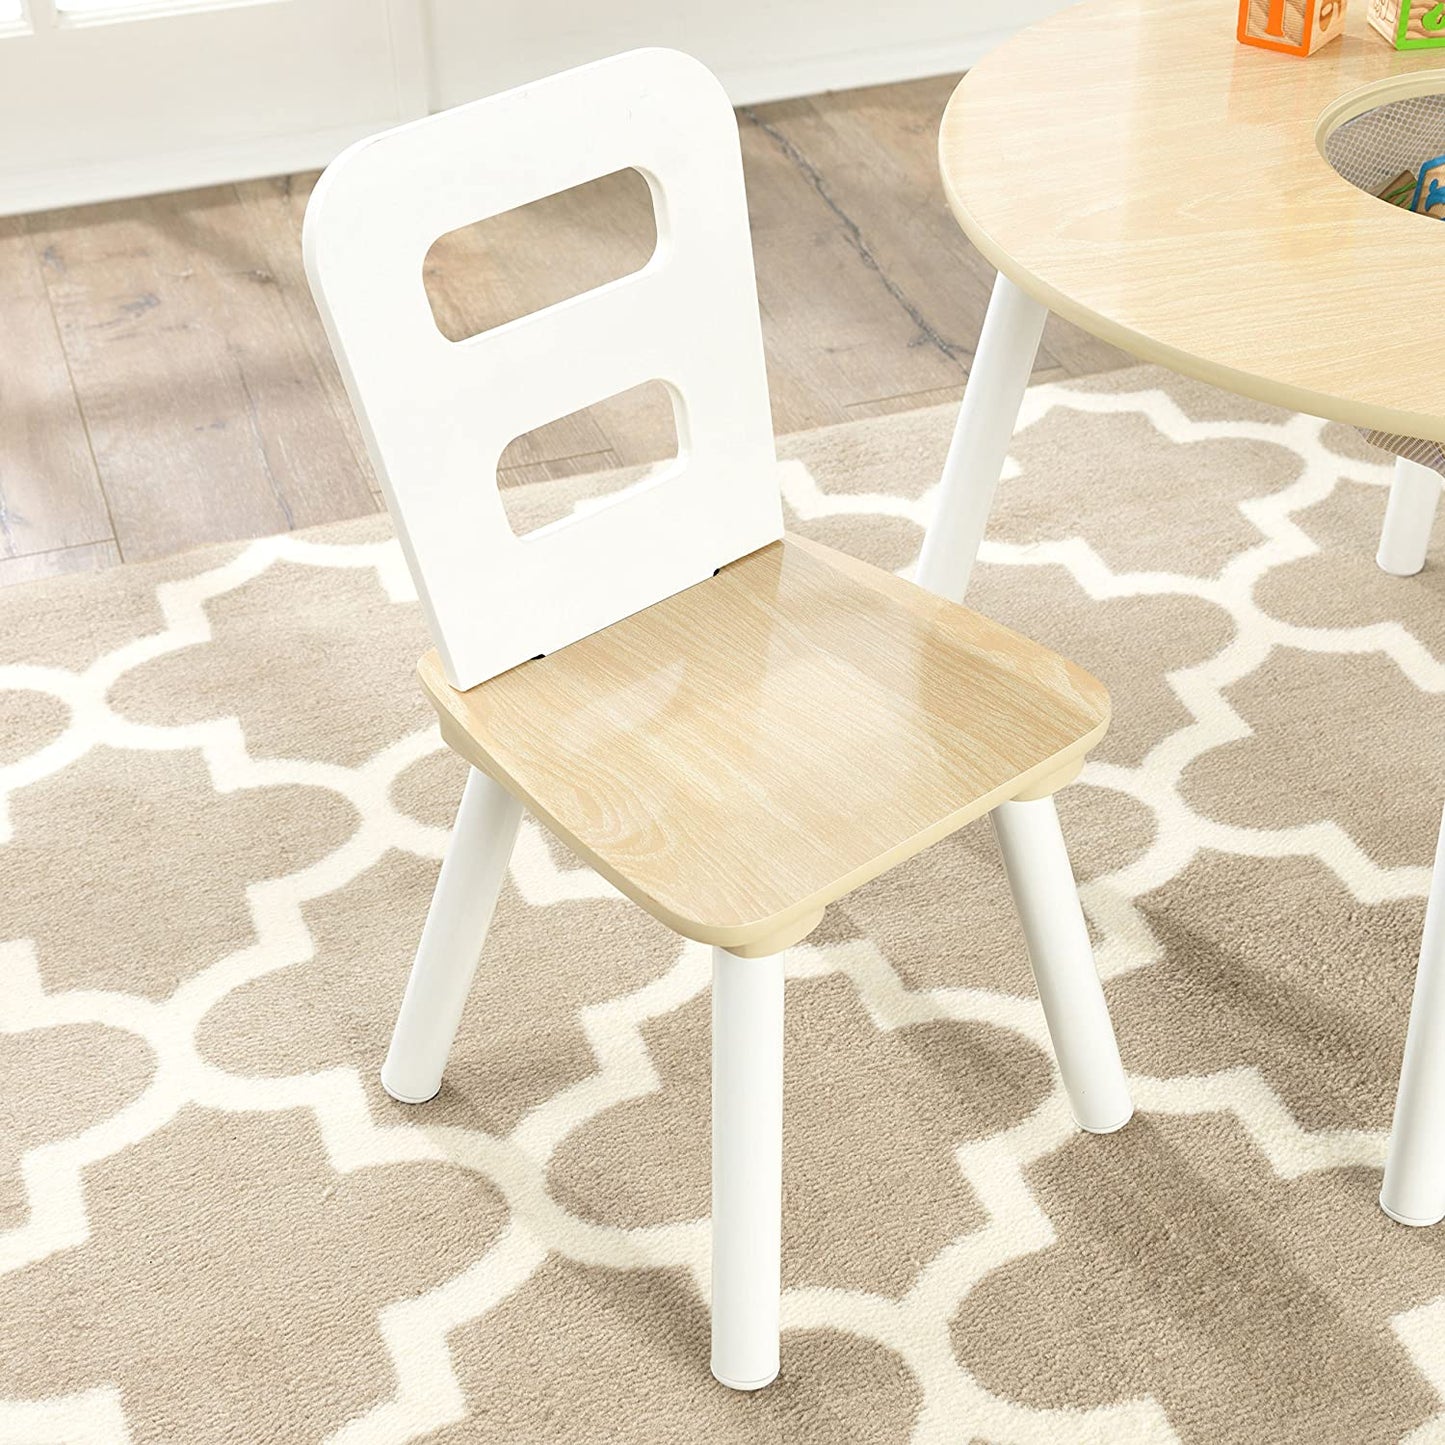 Round Table and 2 Chair Set for children - White Natural